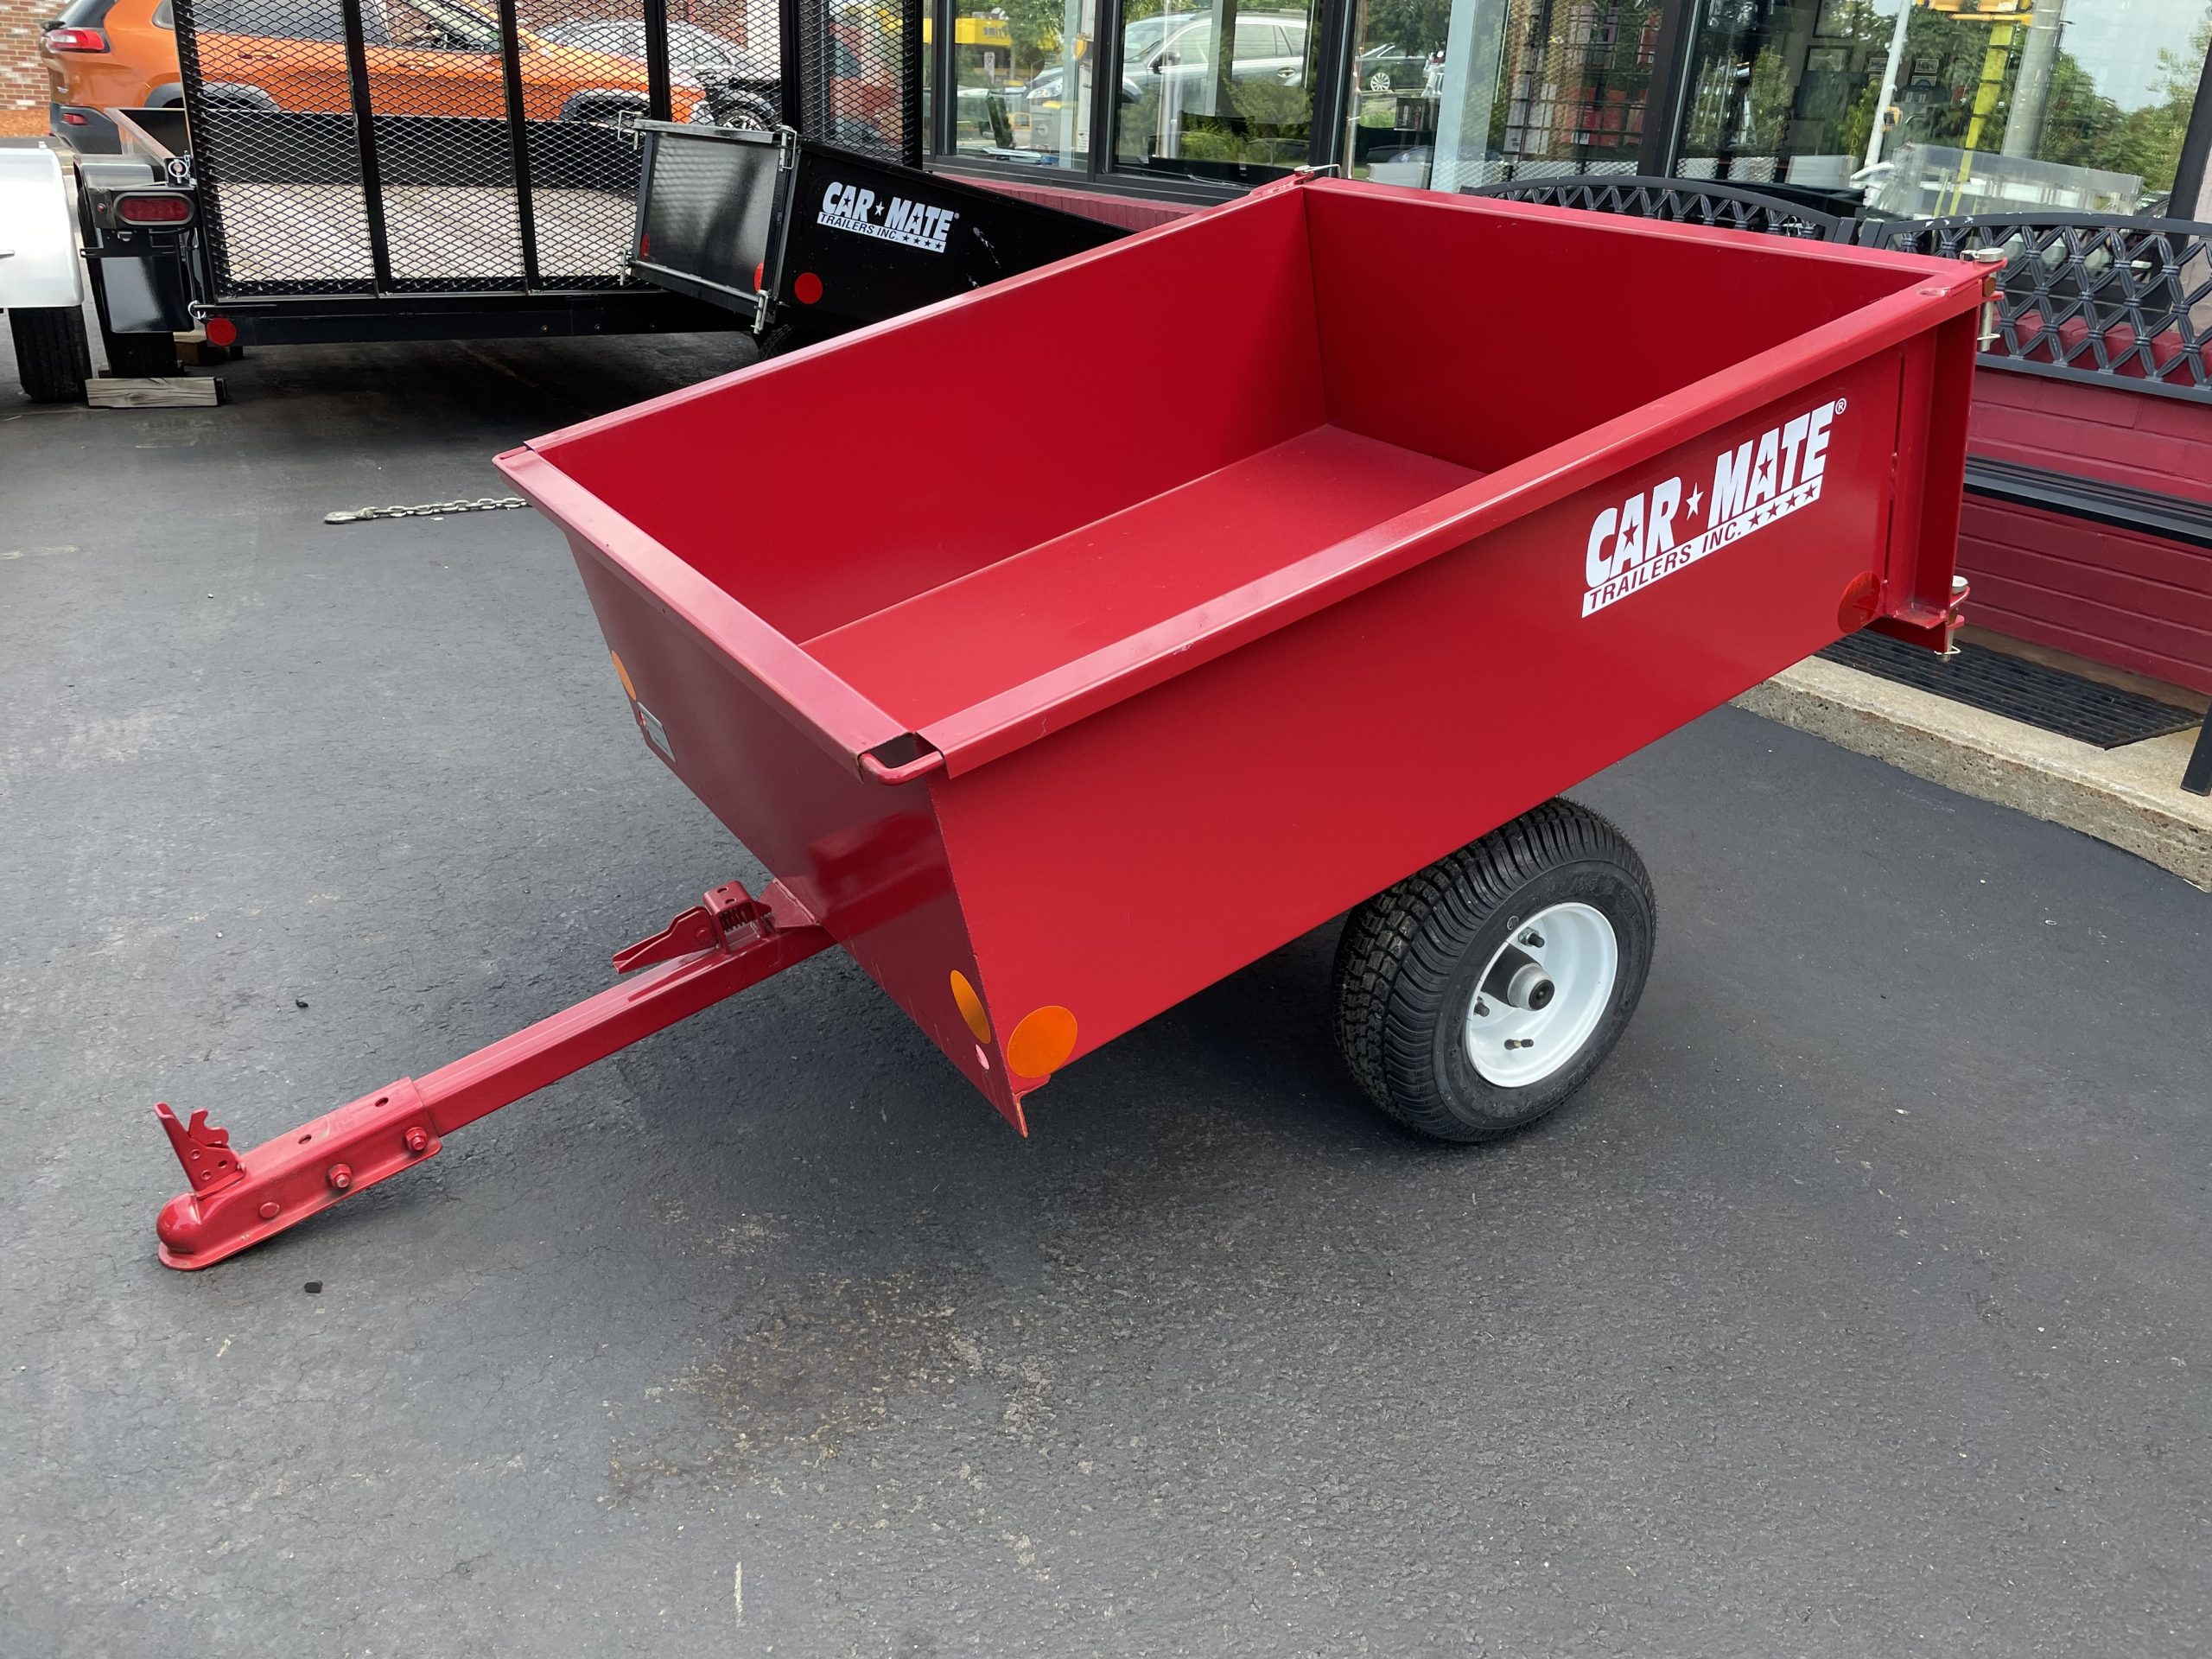 Utility Trailer 4' X 4' Solid Sided Car Mate w/Tail Gate 2" Coupler RED